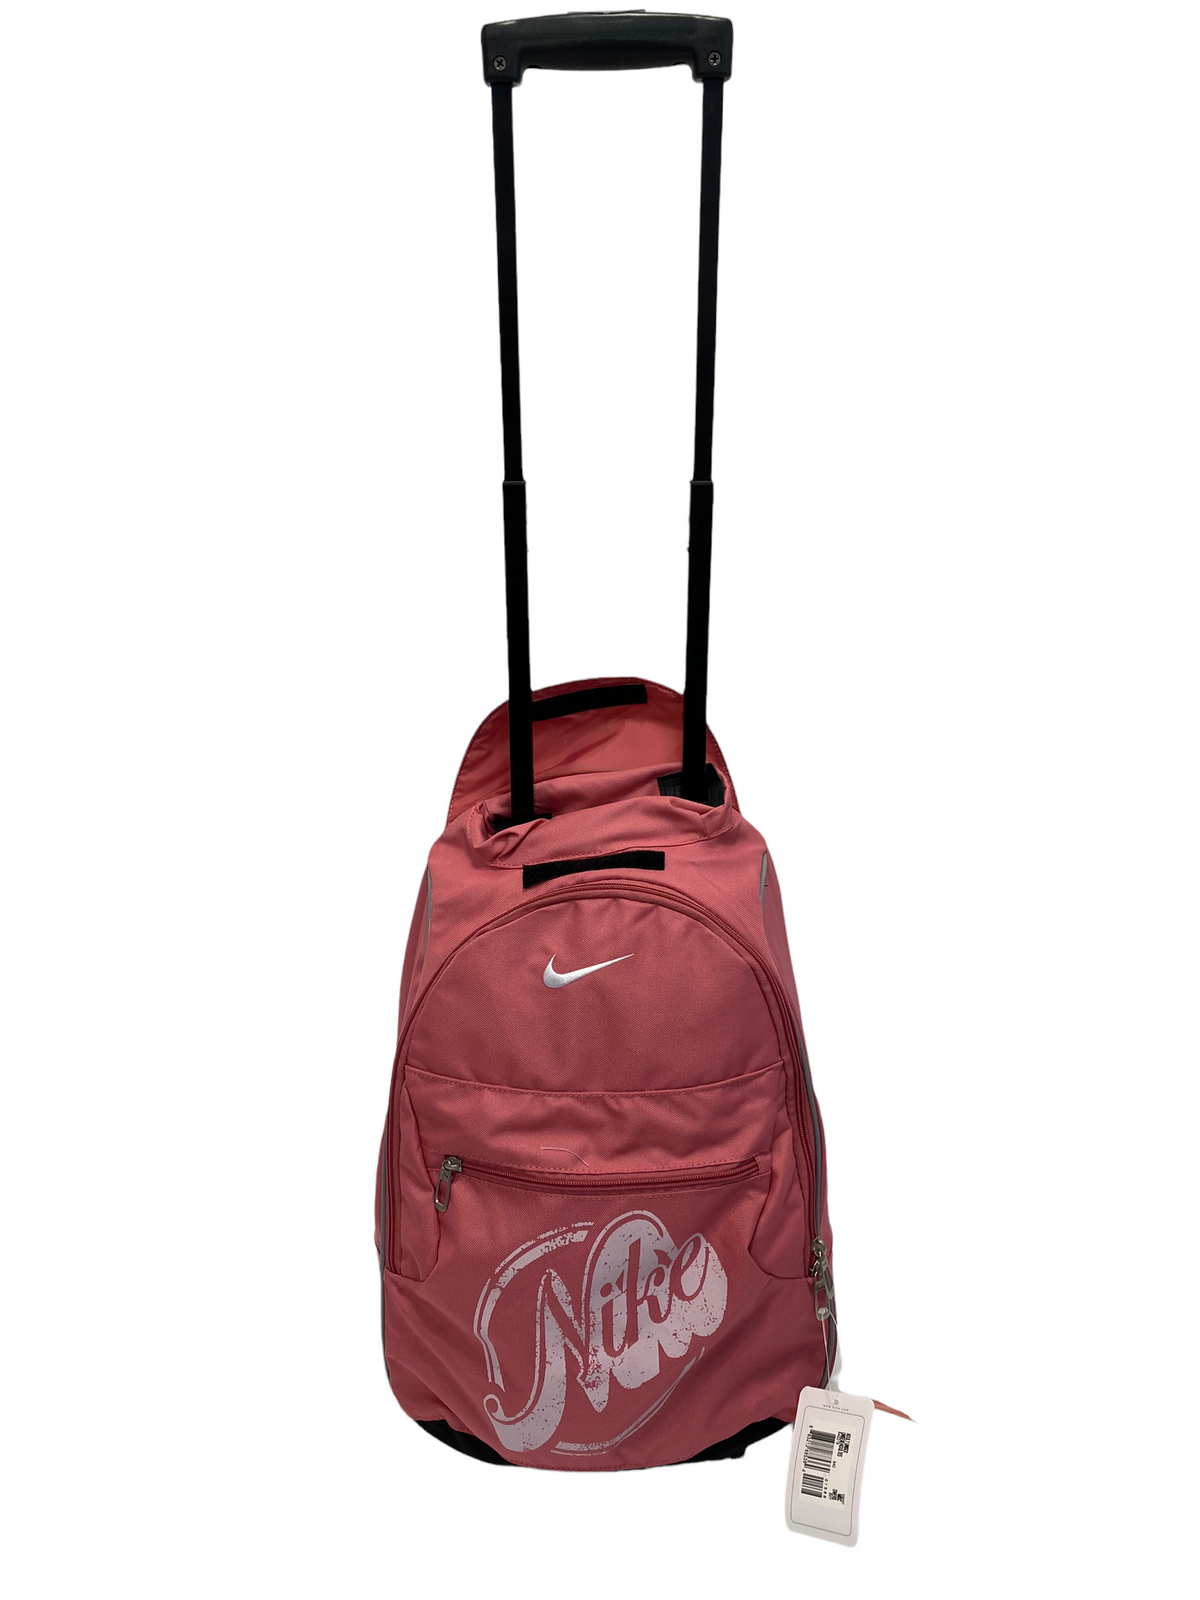 NIKE PULL ALONG TROLLY / BACKPACK IN PINK - Not In Your Wardrobe™ - [Vendor]